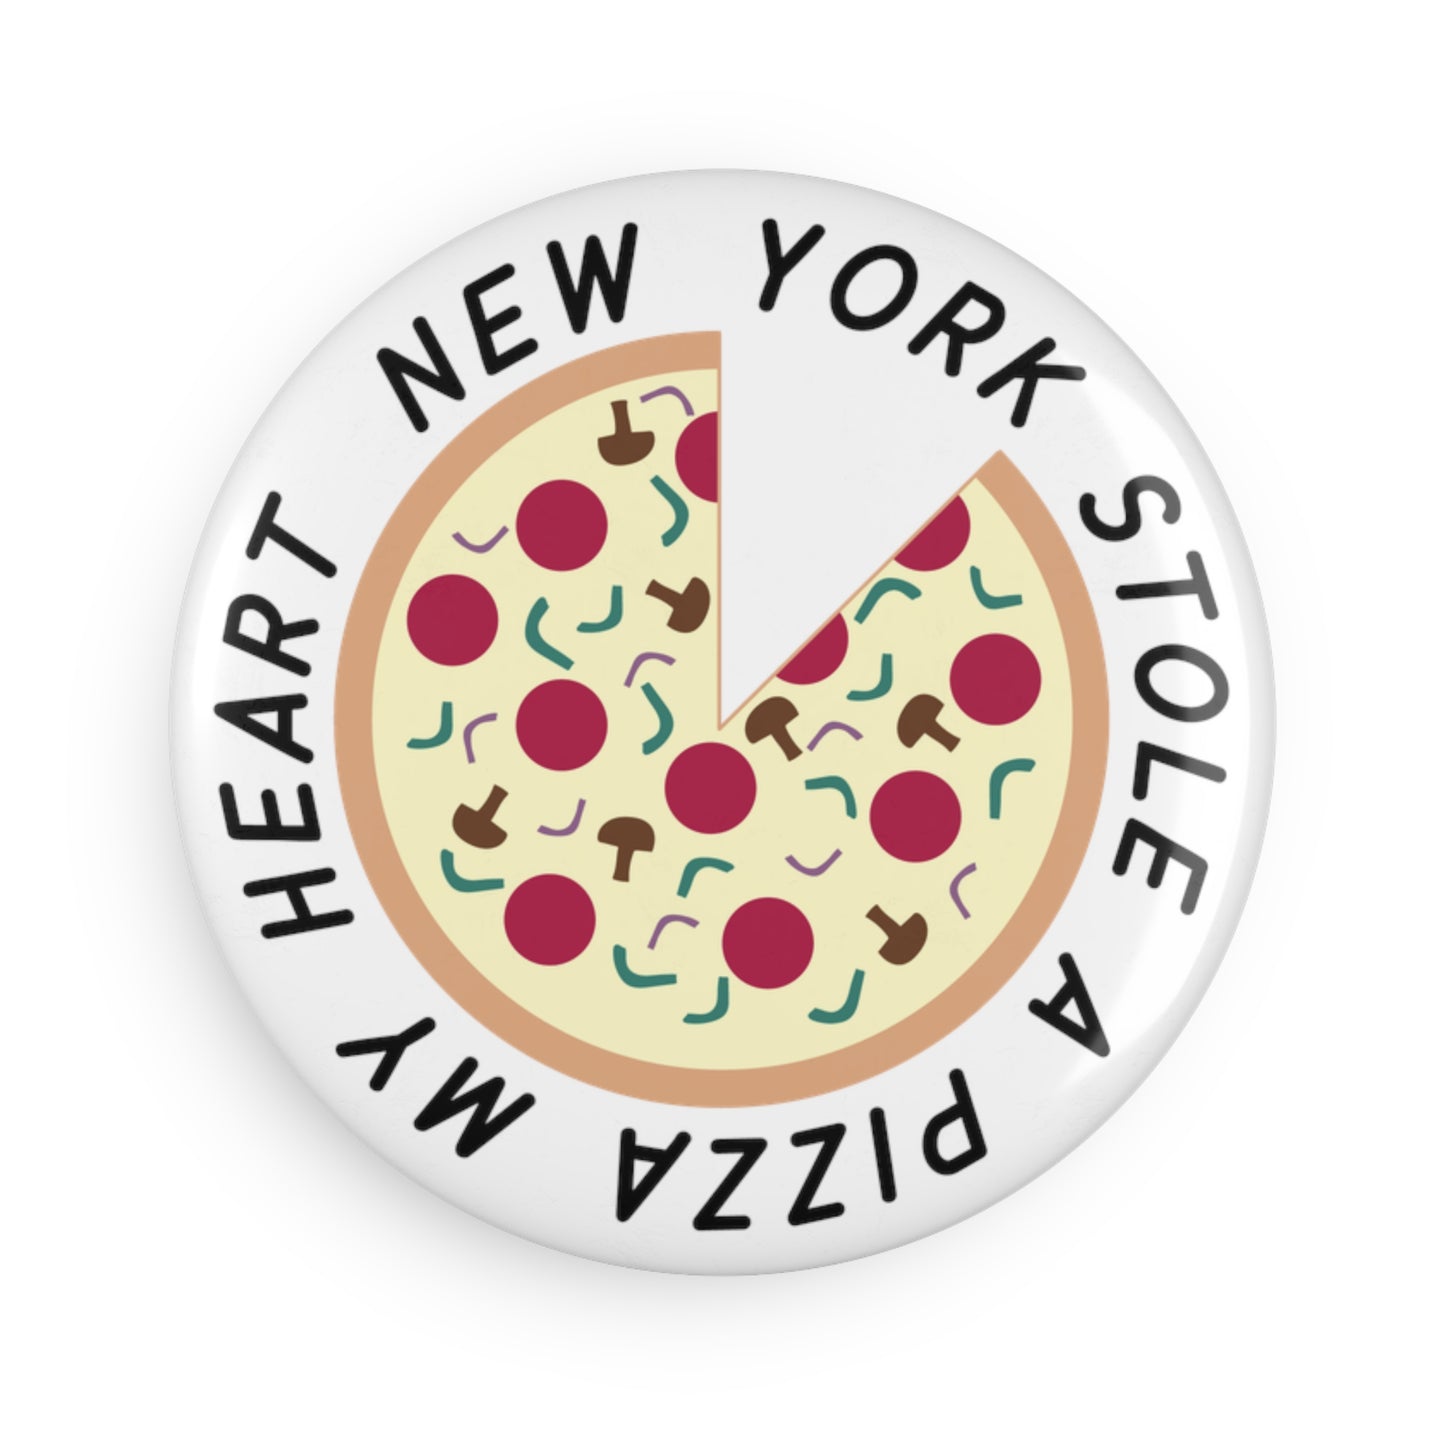 New York Stole a Pizza my Heart / Pepperoni